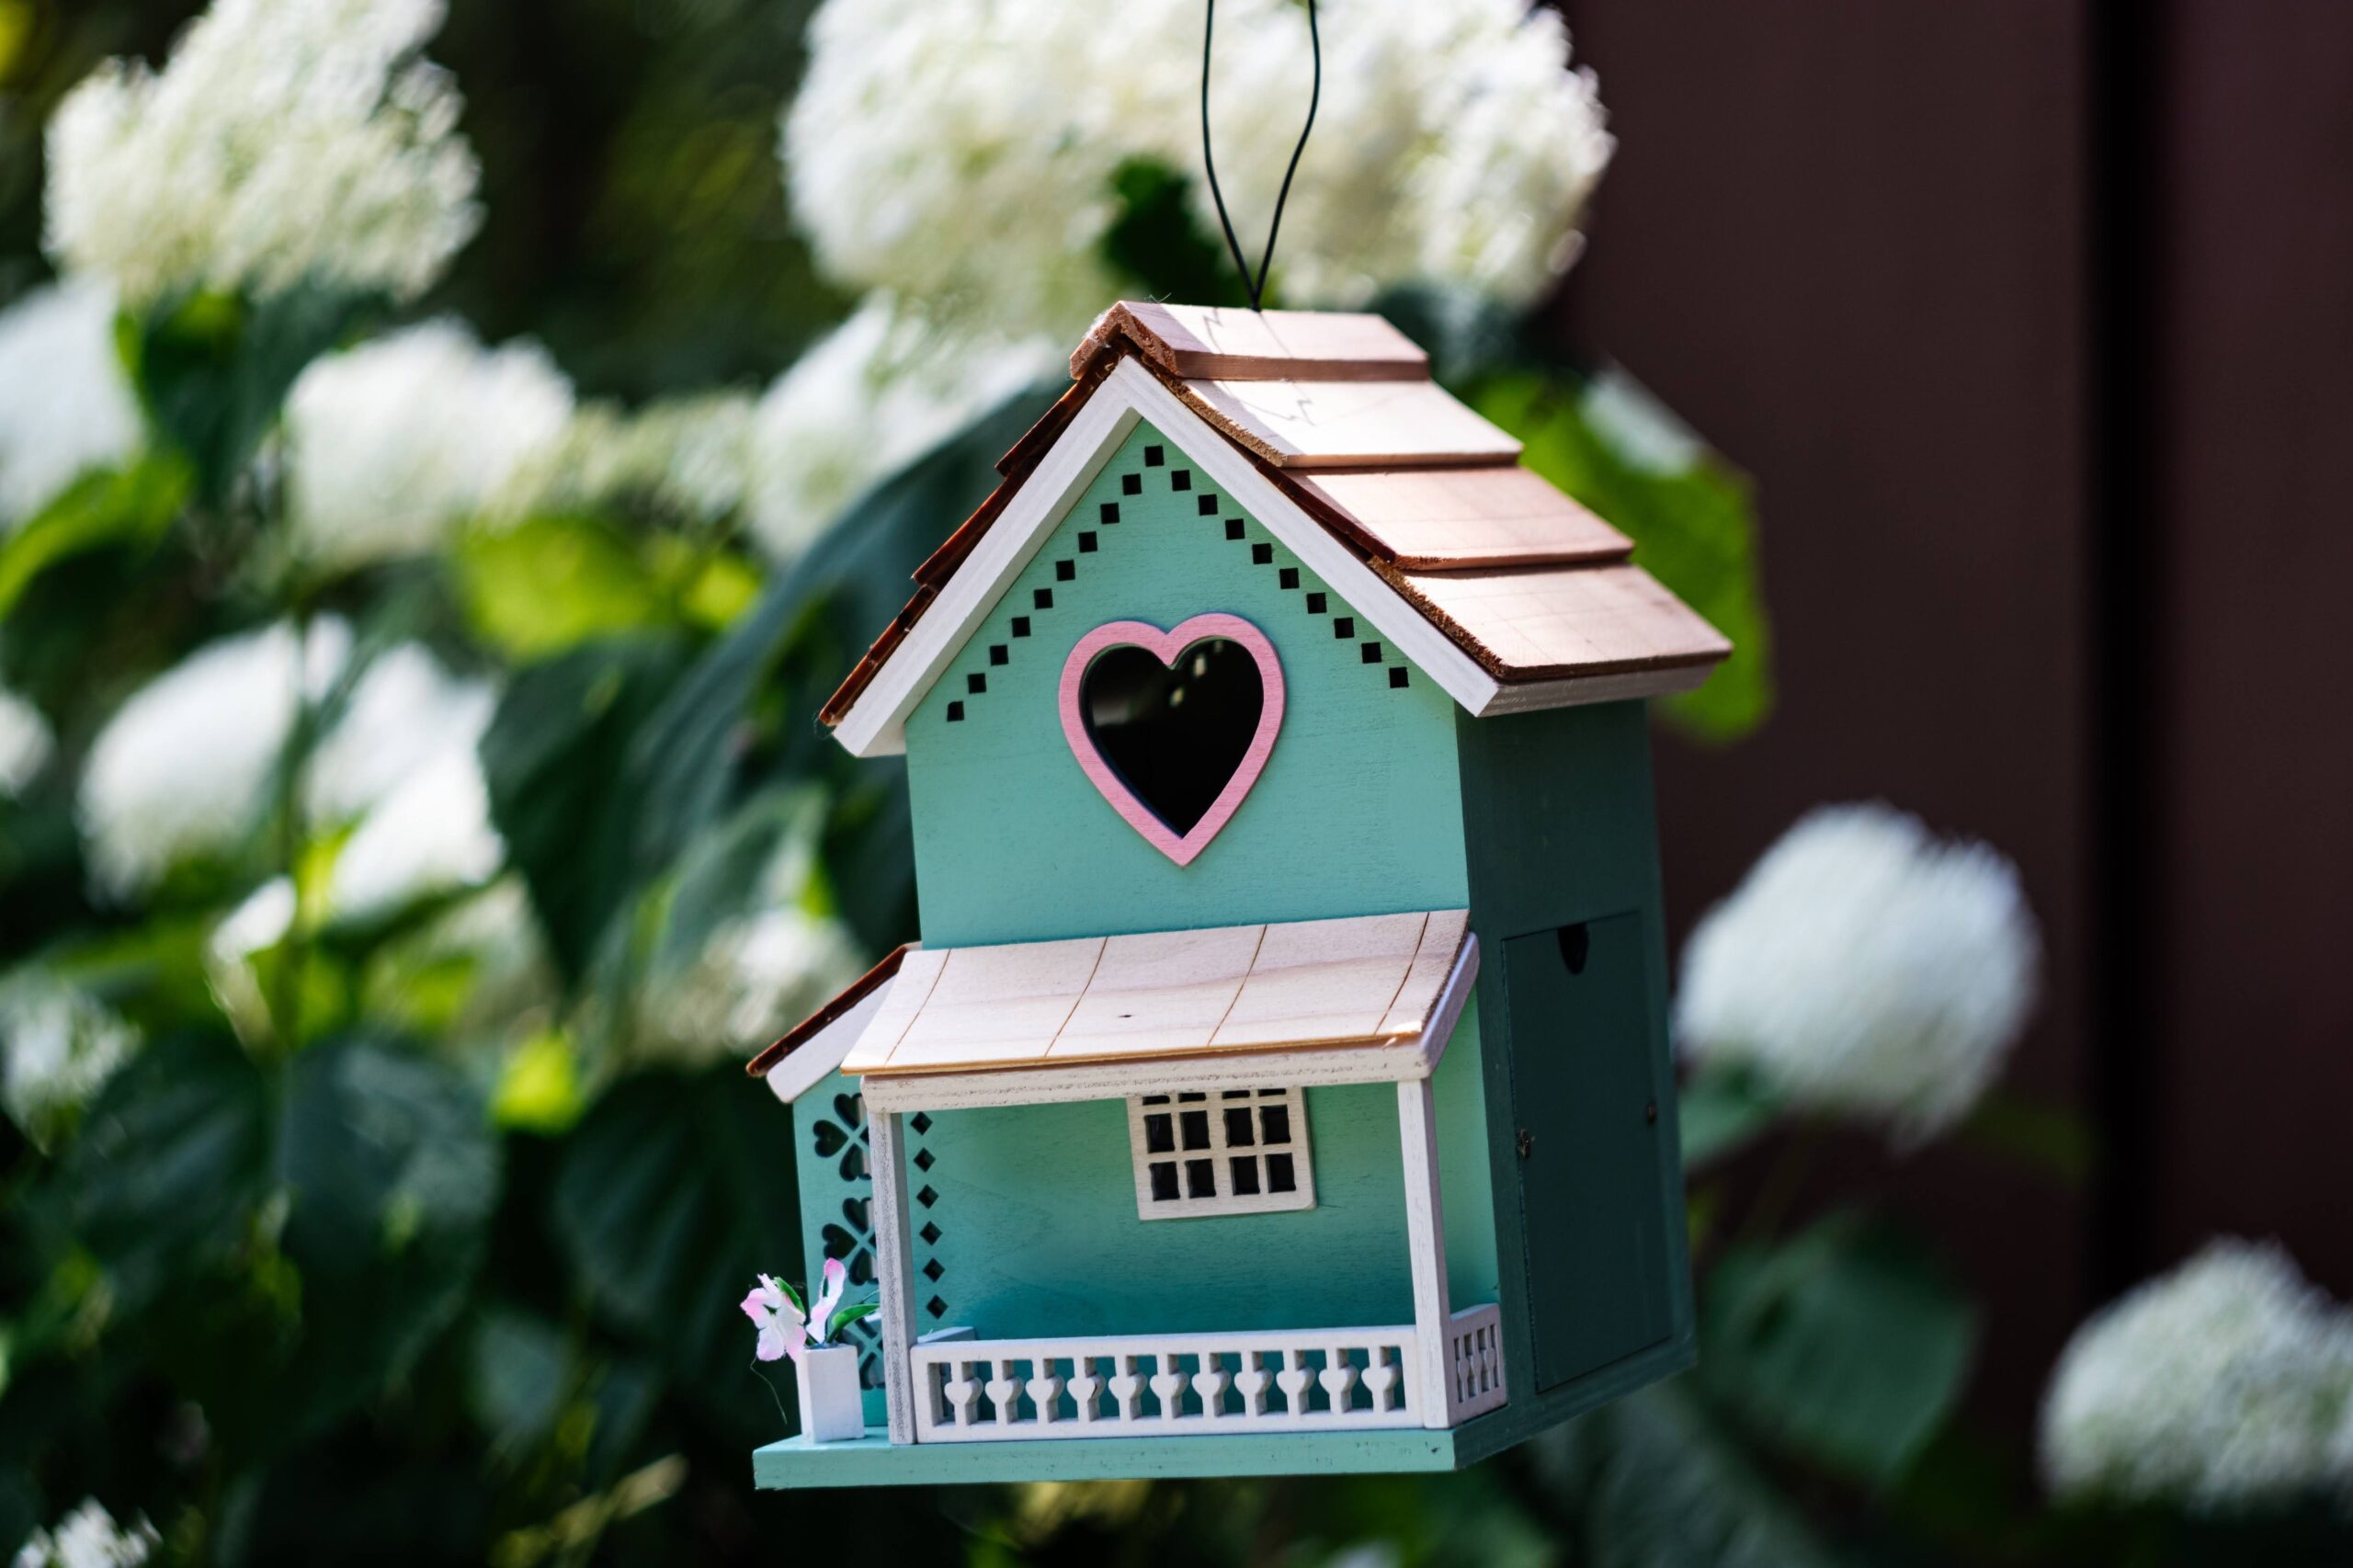 Mint-green Victorian-style birdhouse with heart-shaped hole in gable.